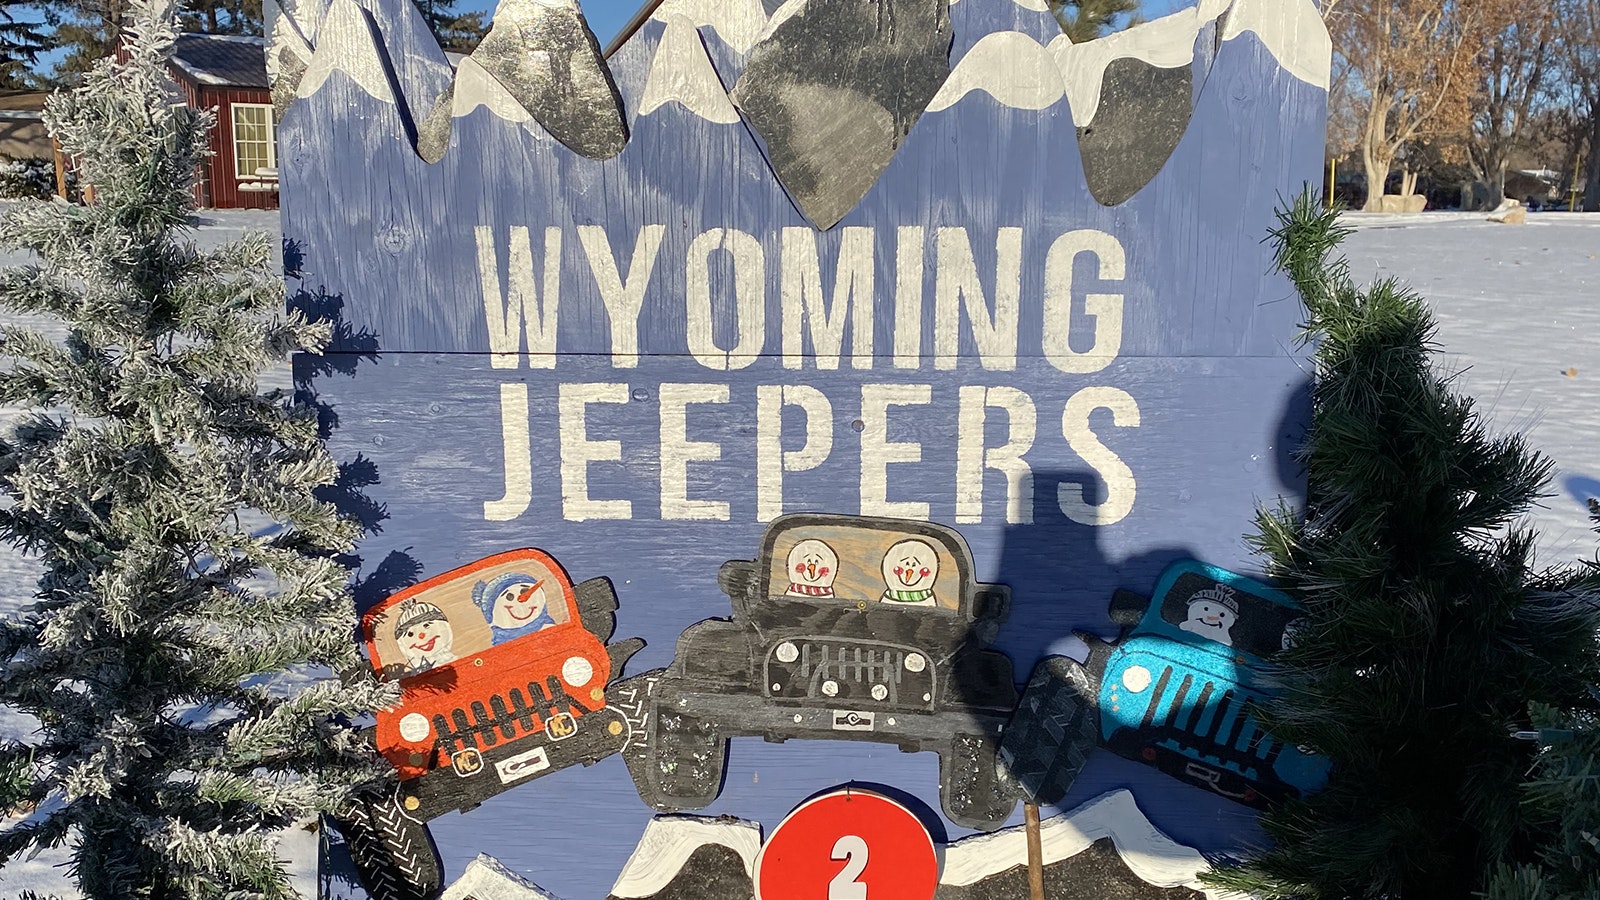 For Wyoming Jeepers, the snowmen are tiny and safe inside their Jeeps.